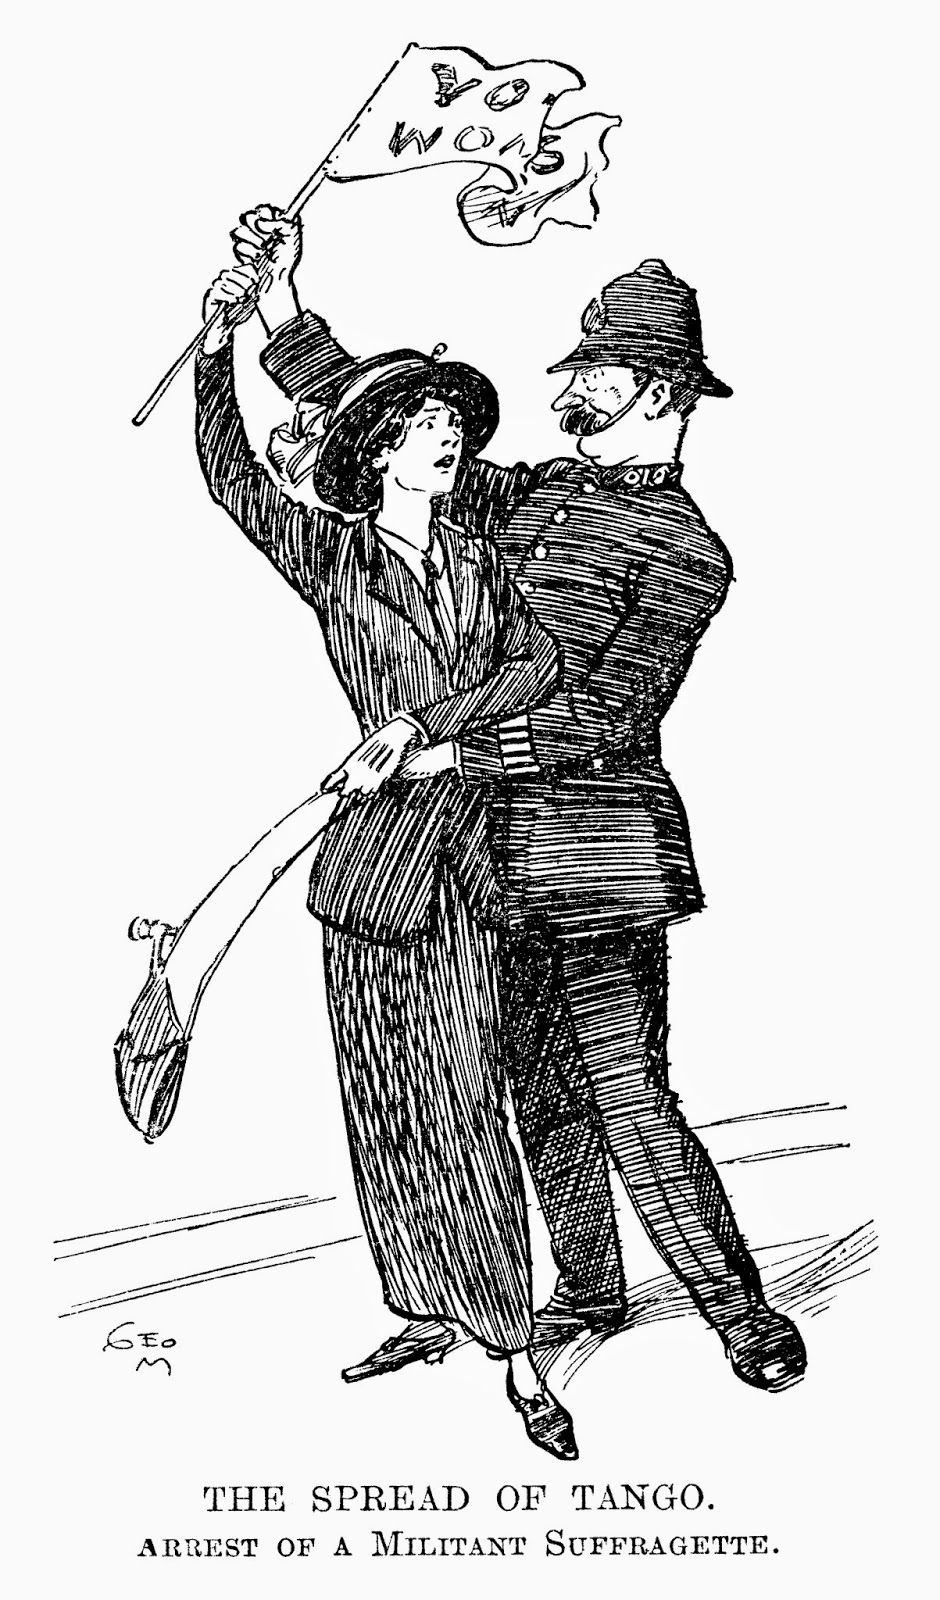 “THE SPREAD OF TANGO. ARREST OF A MILITANT SUFFRAGETTE” Punch Magazine, London, 1913